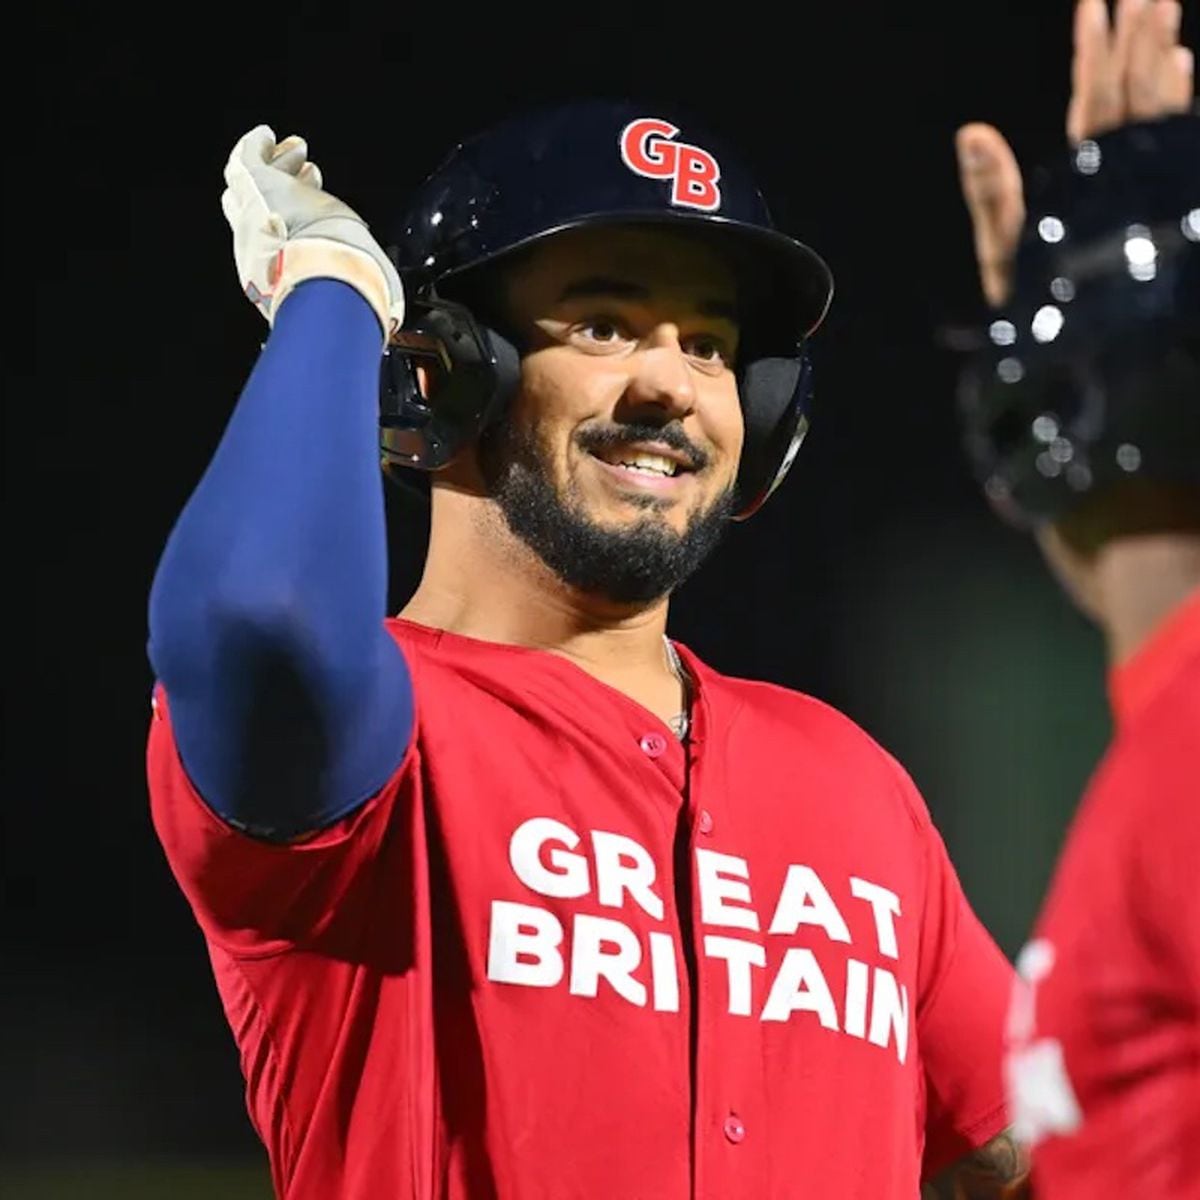 Great Britain's unlikely baseball heroes win in the World Baseball